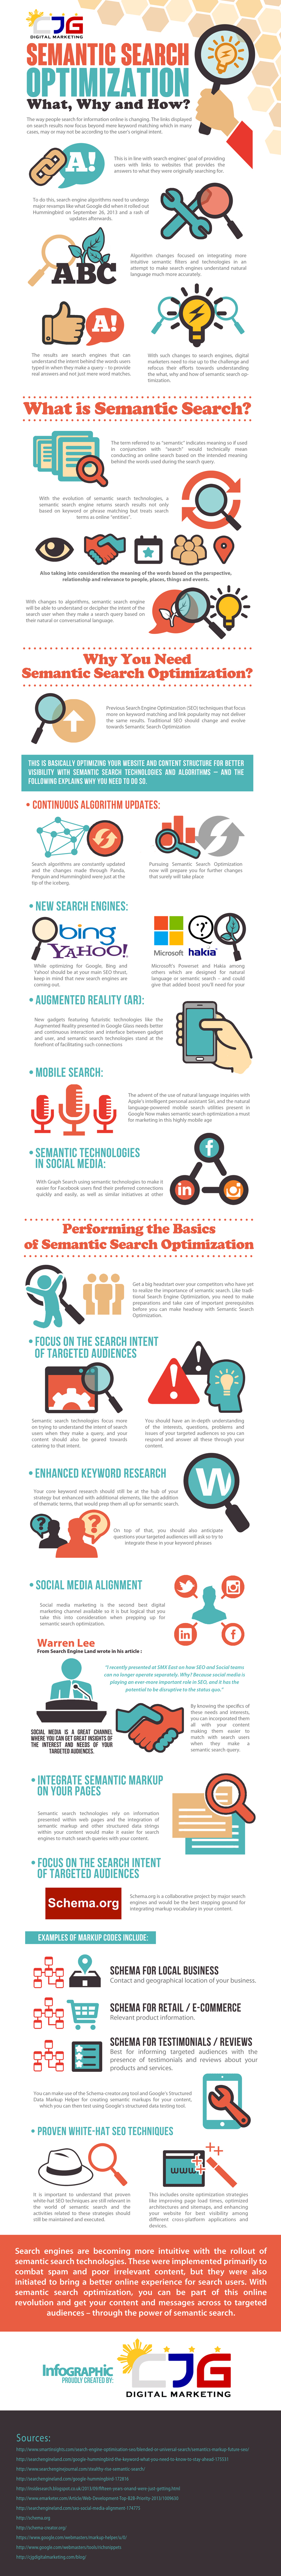 Semantic-Search-Optimization-What-Why-and-How